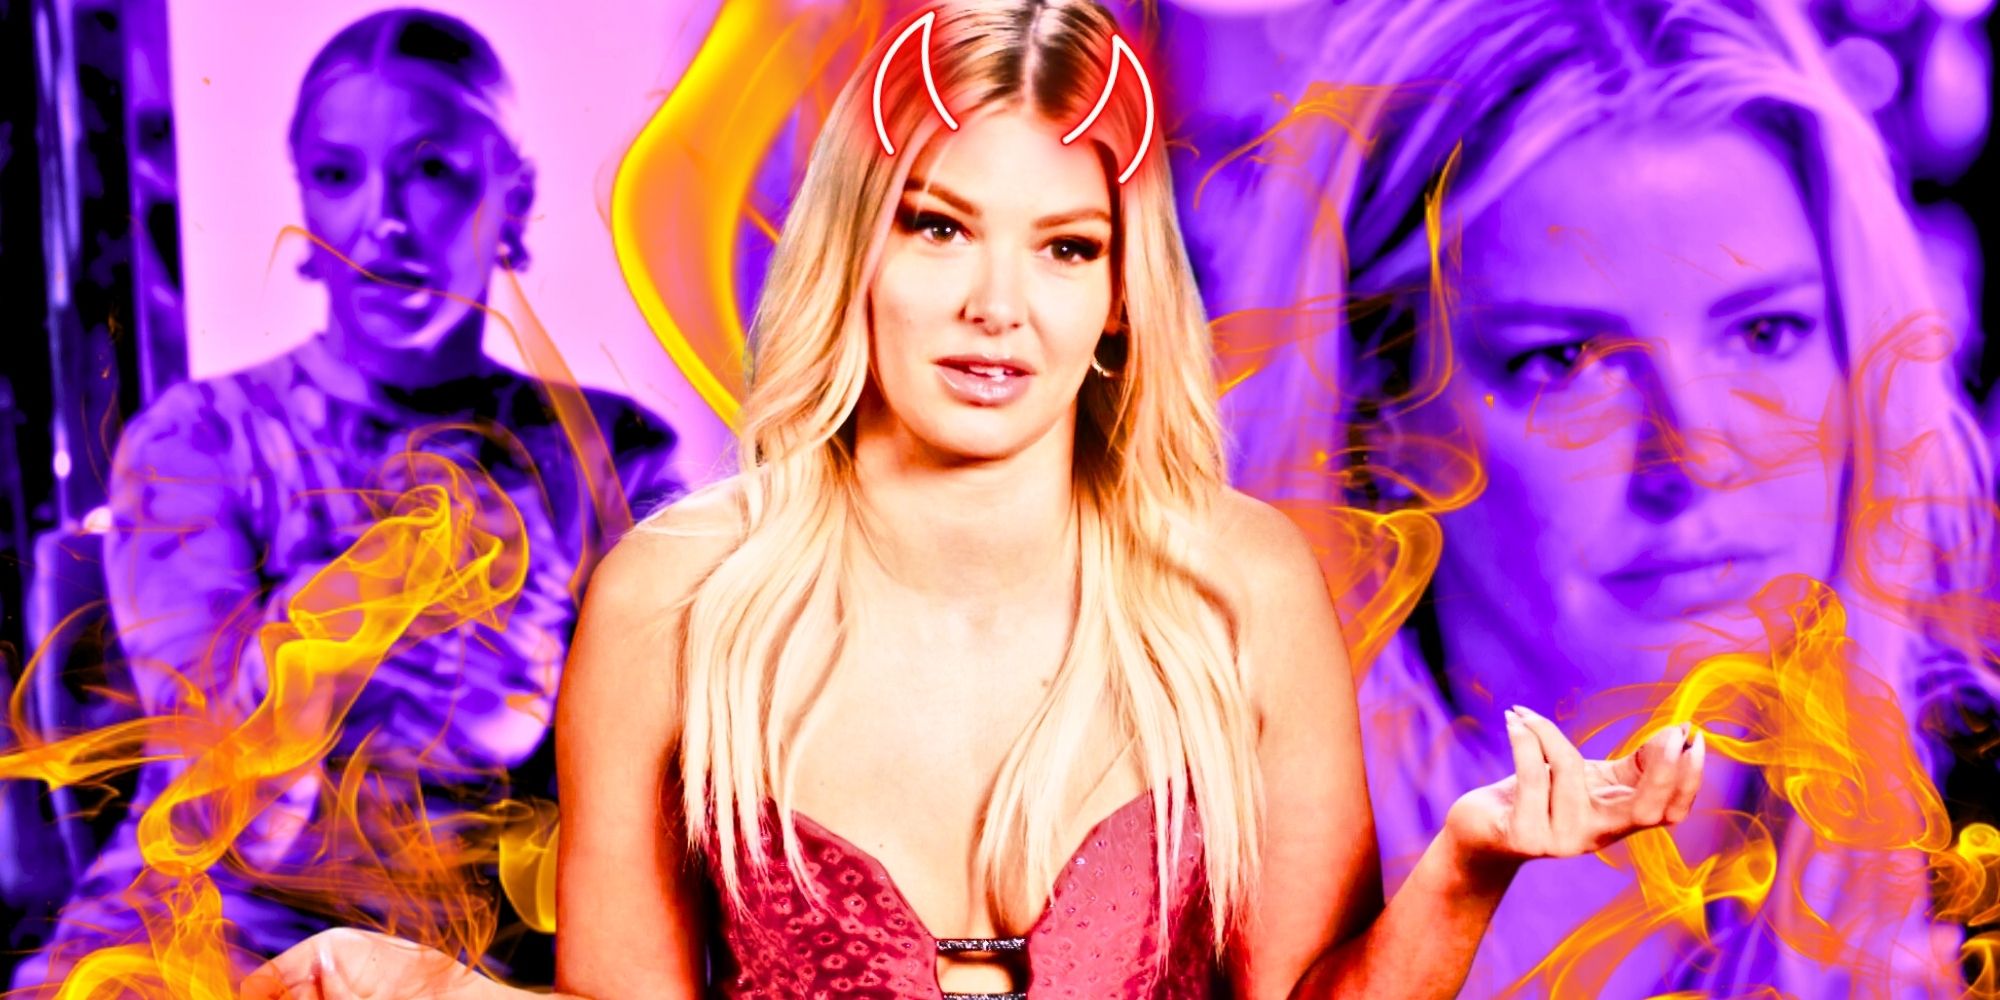 Vanderpump Rules Ariana Madix montage with purple bakcground and flames